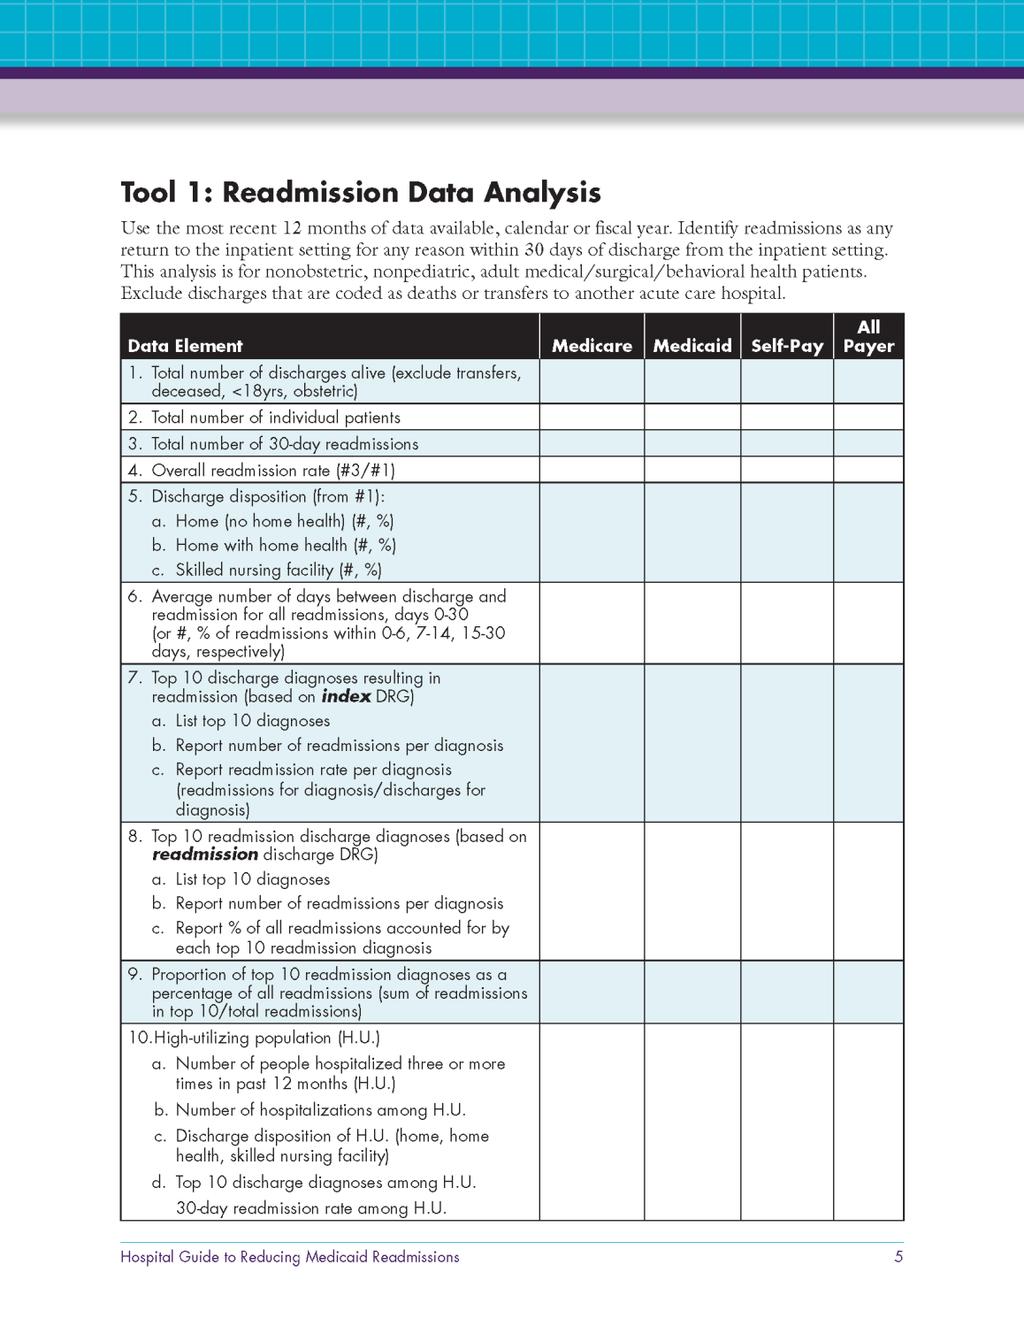 This is a 10-point analysis of data to facilitate a compare and contrast view of readmissions